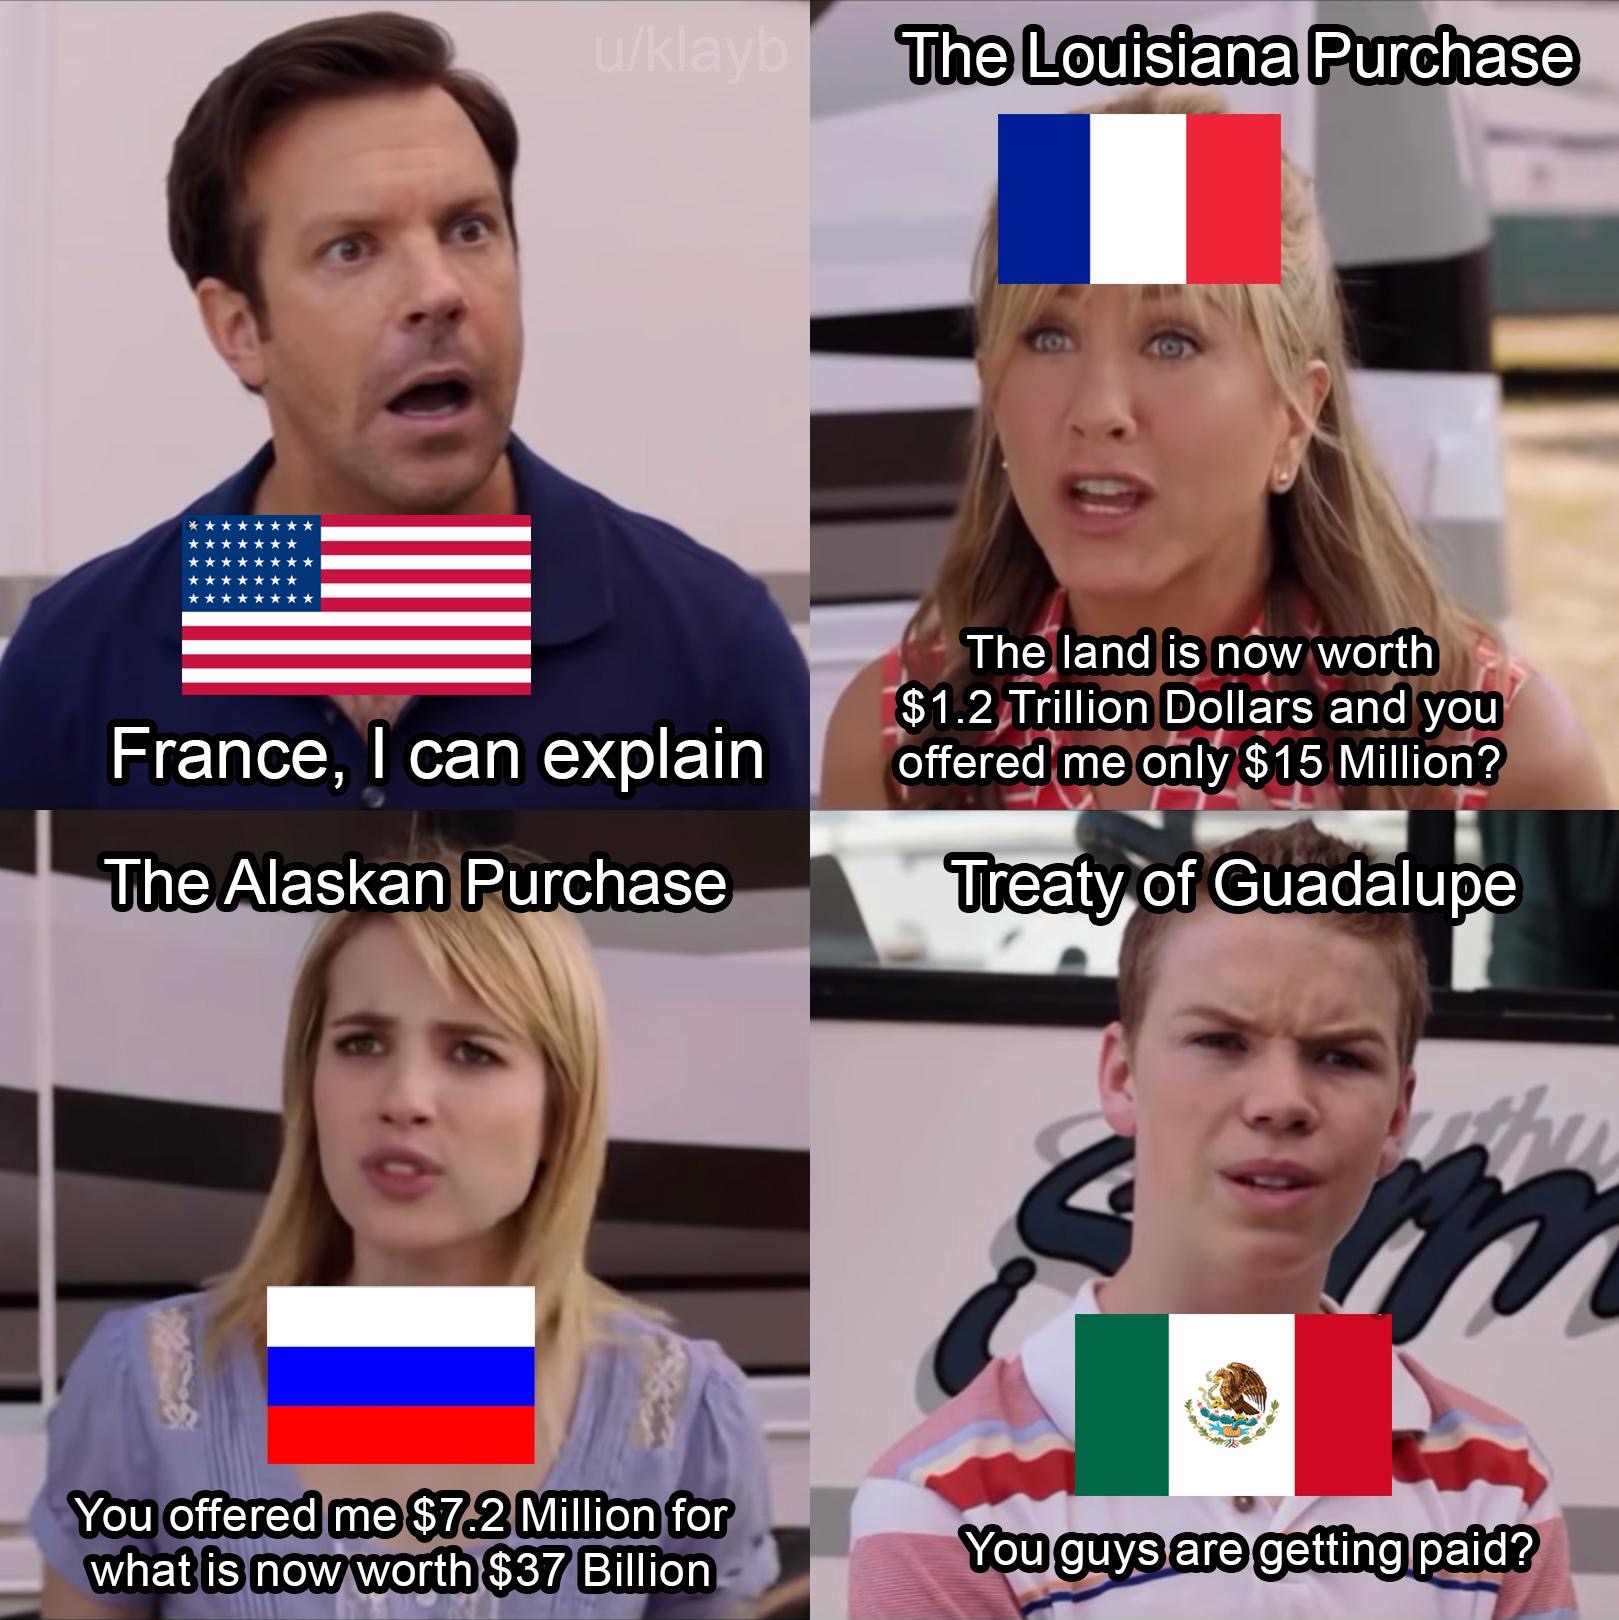 you guys are getting paid meme template - The Louisiana Purchase 01 The land is now worth $1.2 Trillion Dollars and you offered me only $15 Million? France, I can explain The Alaskan Purchase I Treaty of Guadalupe You offered me $72 Million for what is no